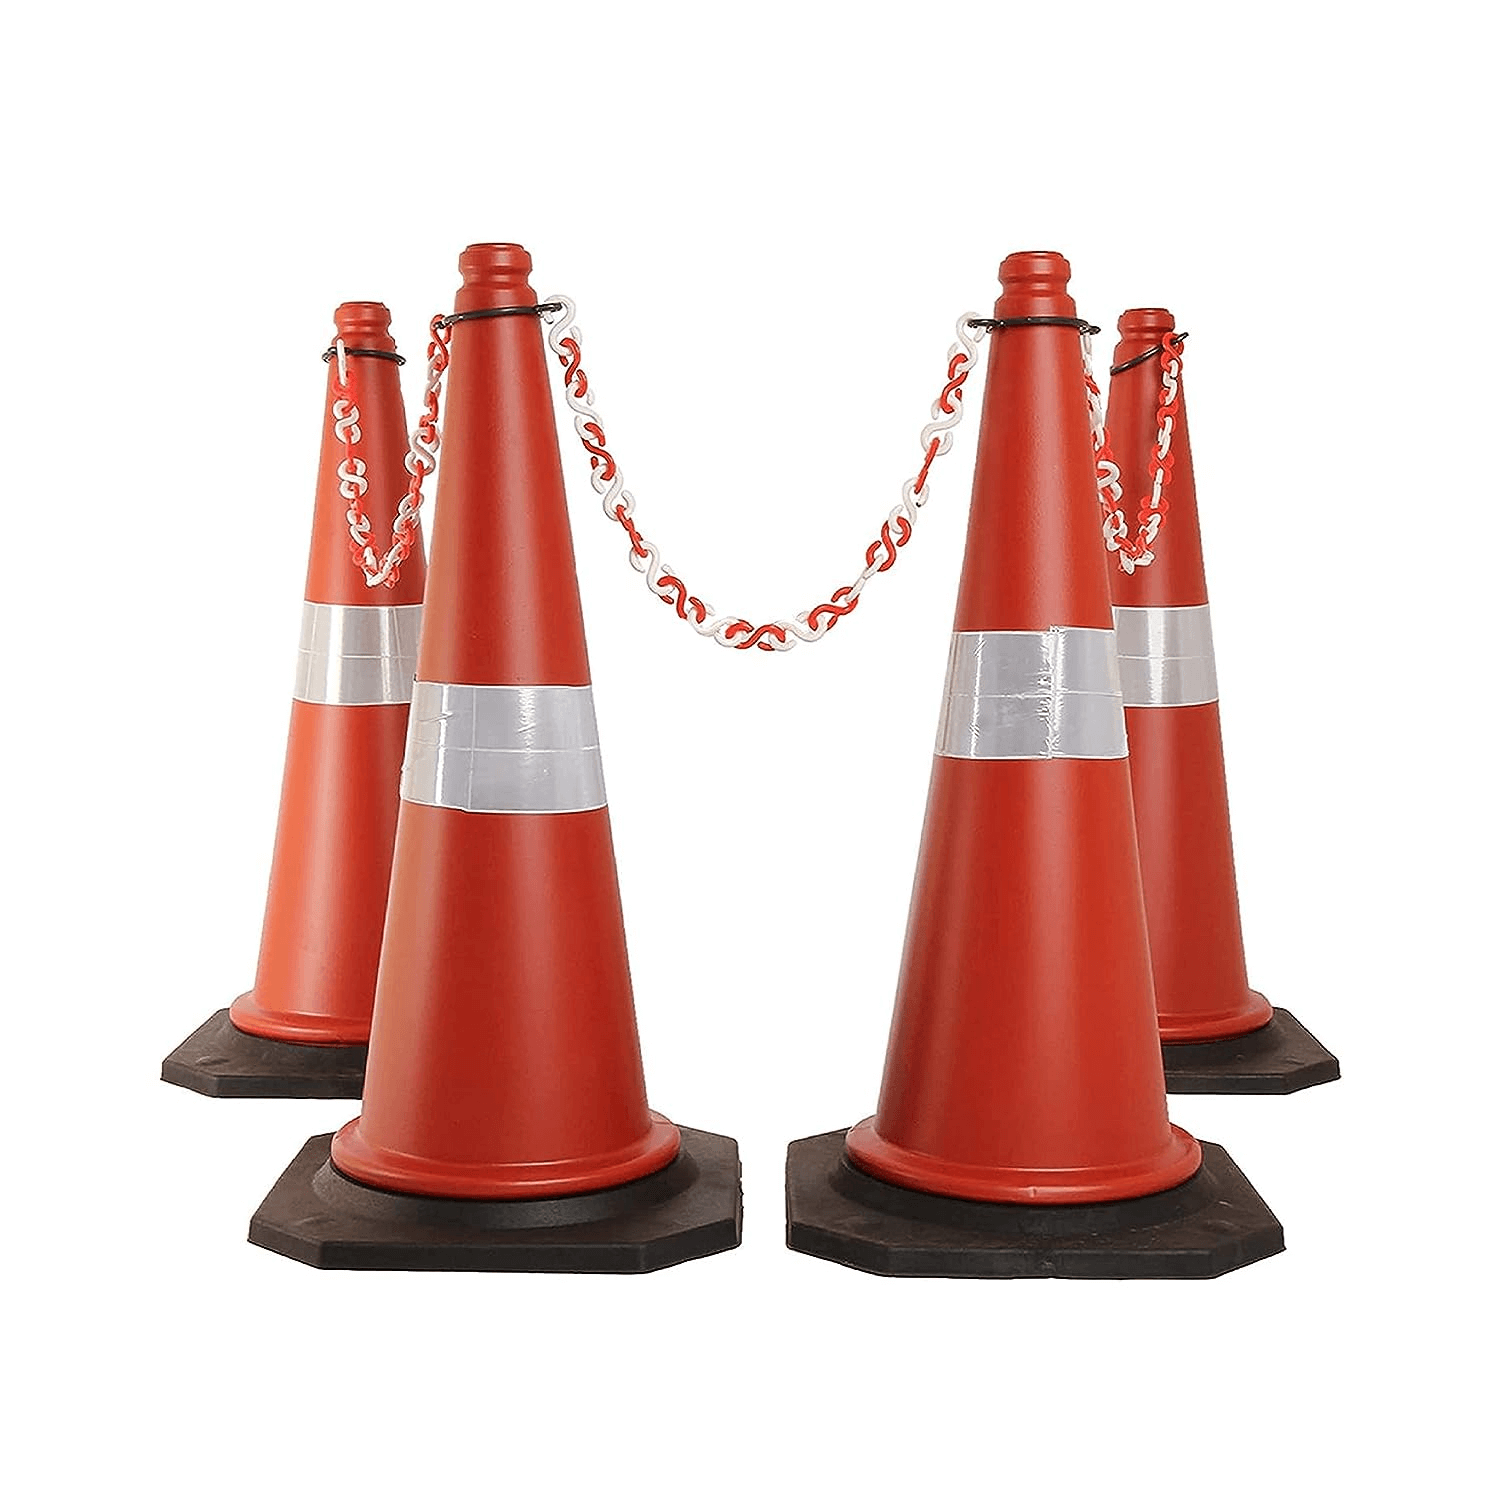 health-safe-safety-cone-with-chain-plastic-barricade-traffic-safety-cone-with-black-rubber-base-reflective-strips-collar-and-round-ring-impact-resistant-pack-of-4